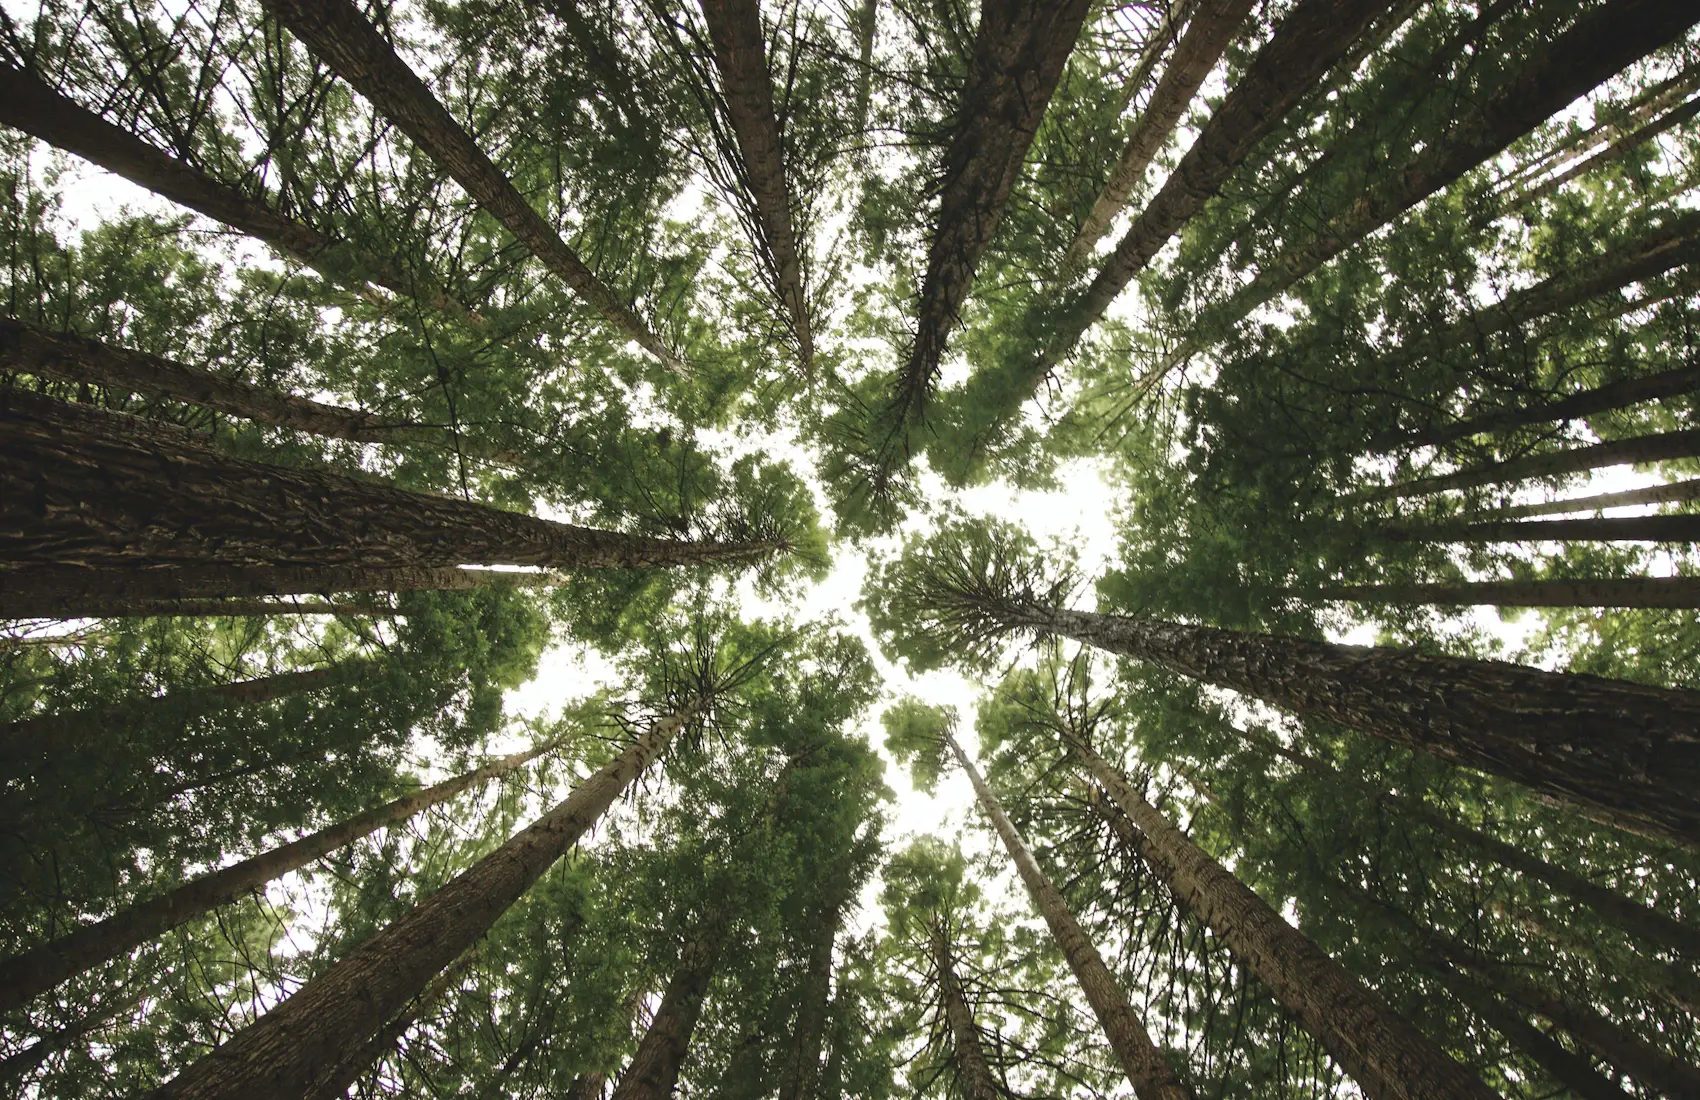 Photo of a forest from ground perspective